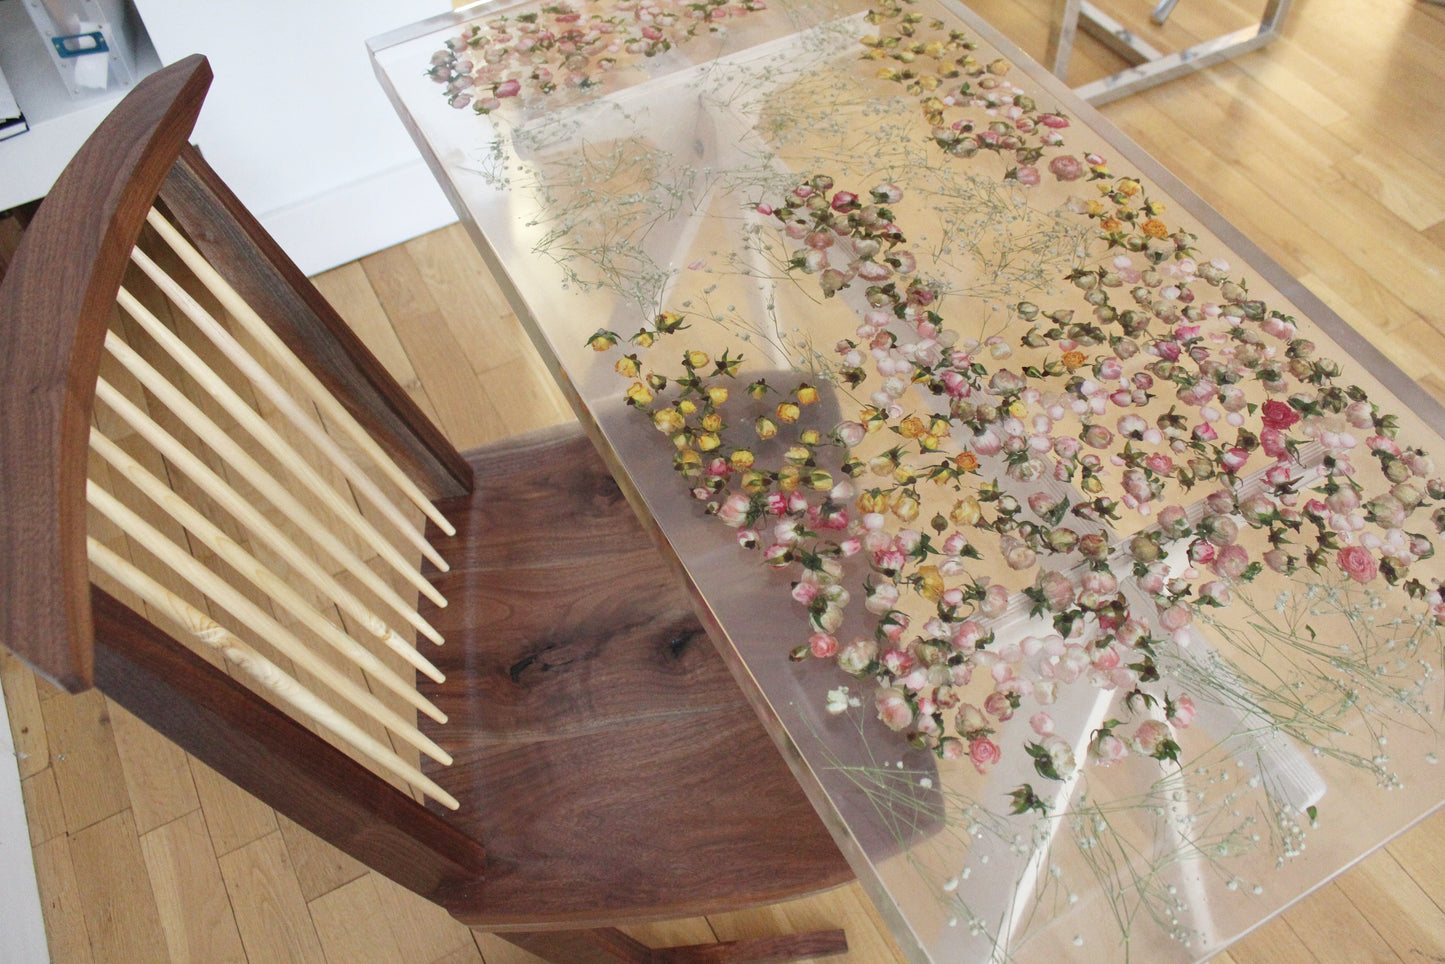 a hand-poured resin desk where hundreds of real rosebuds and baby's breath sprigs float atop a sturdy birch base